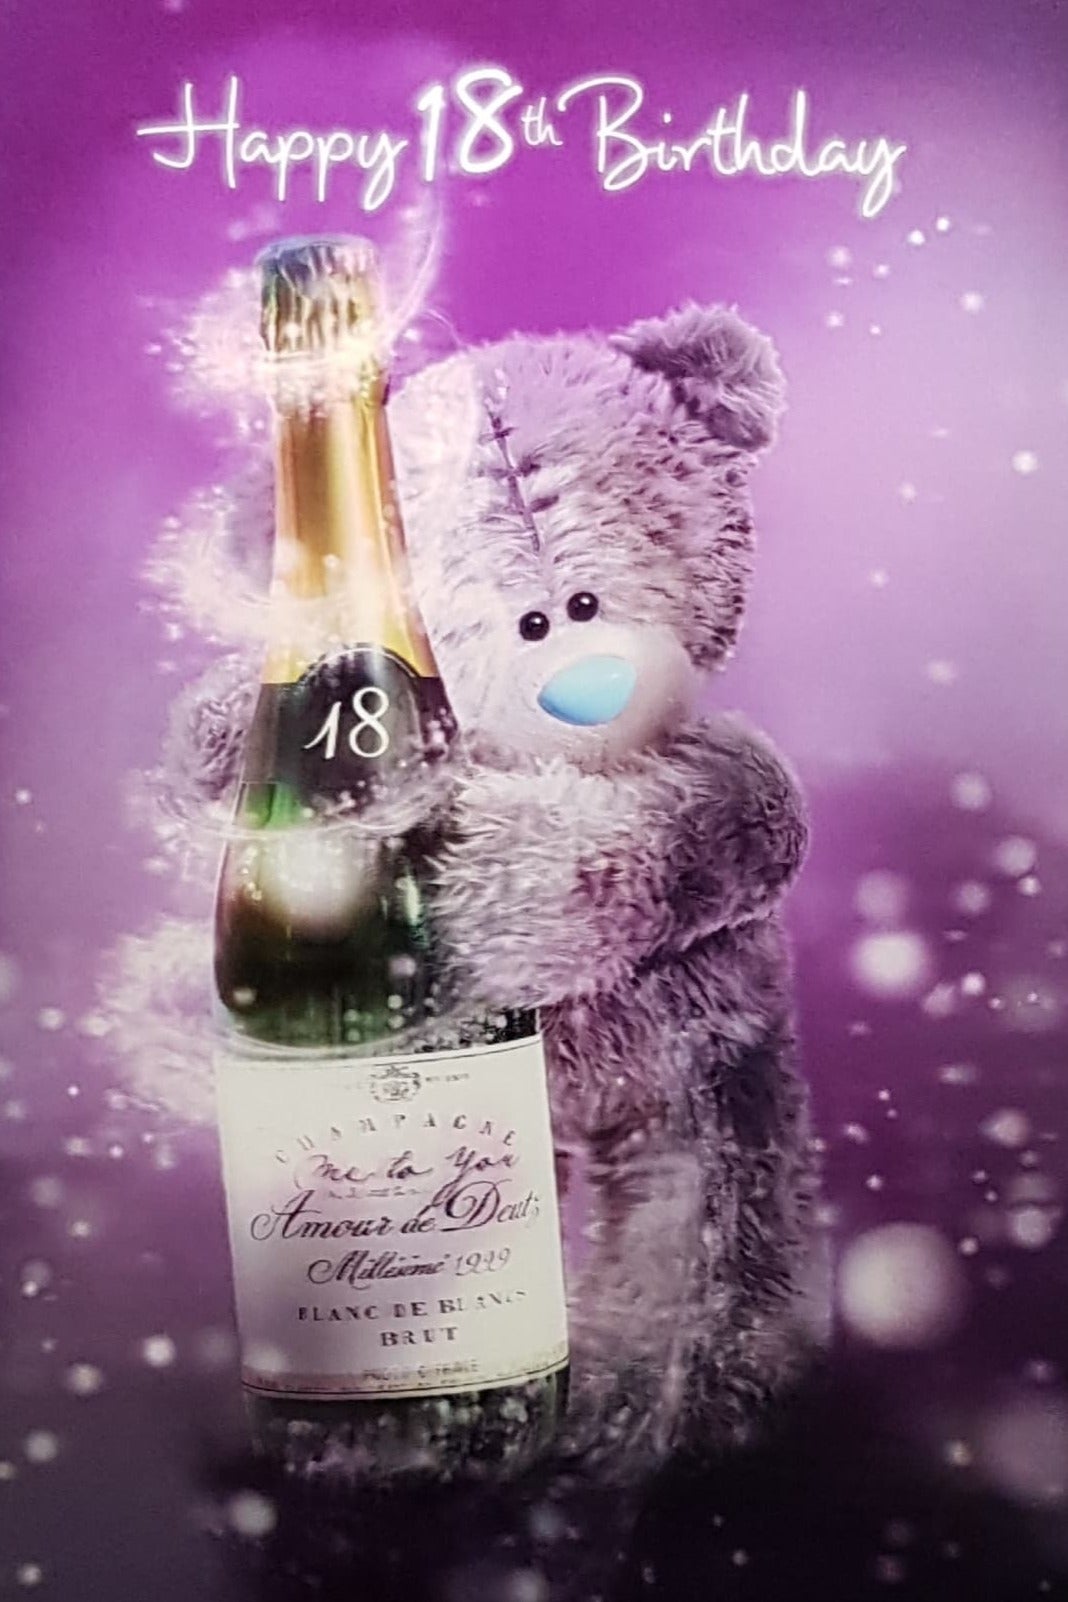 Age 18 Birthday Card - Fluffy Teddy Holding A Champagne Bottle & Sparkly Swirls (3D Card)